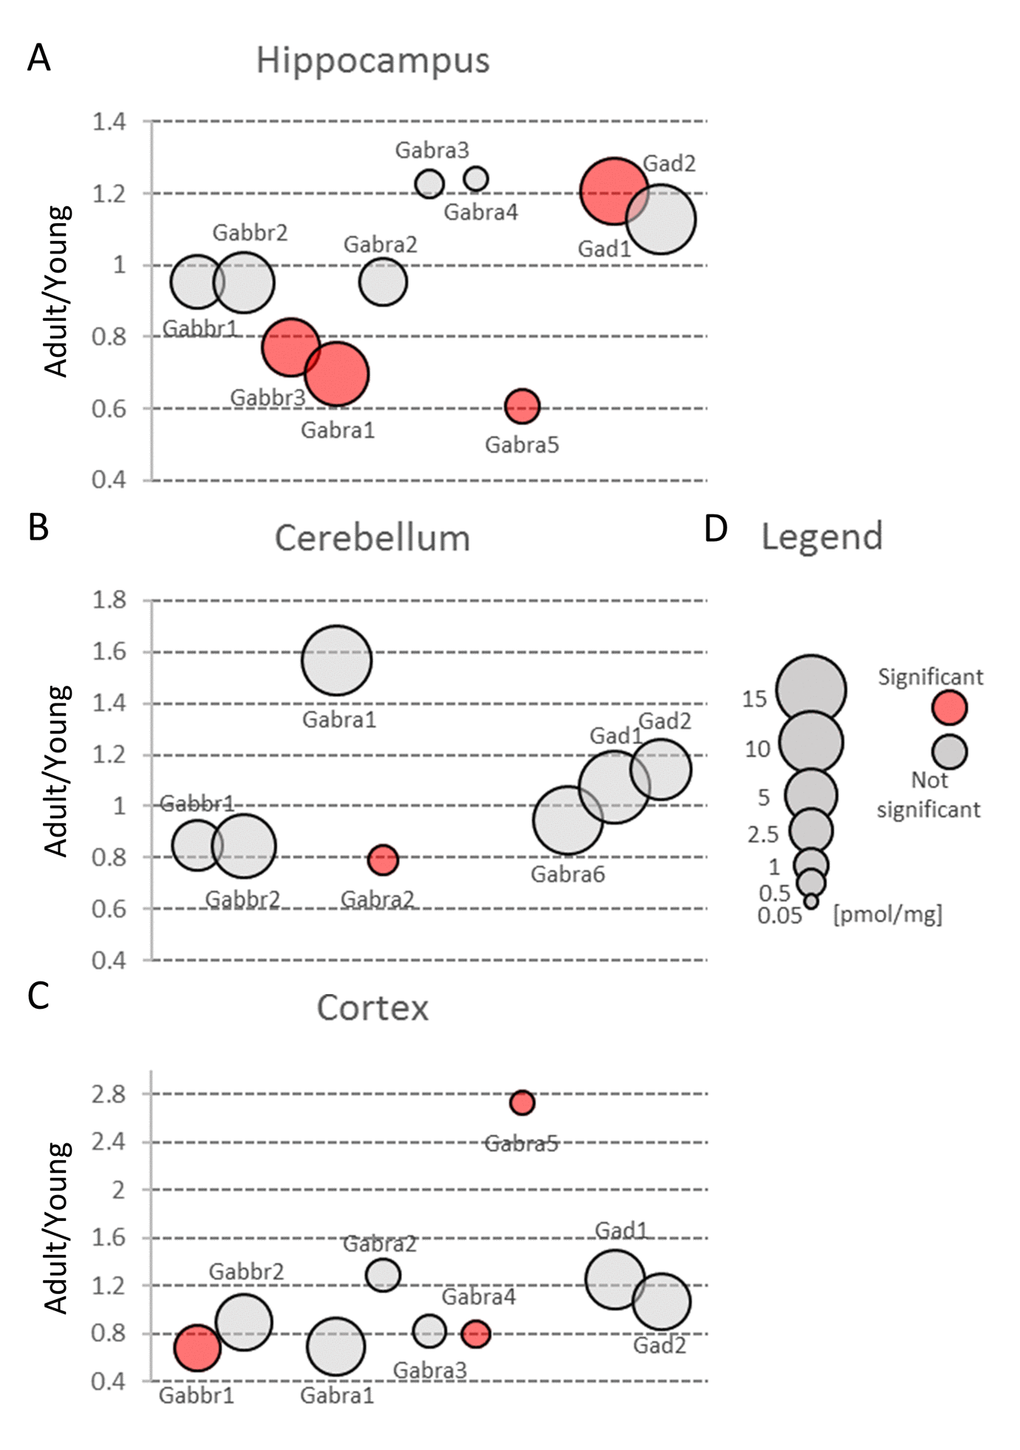 Aging-related changes in proteins involved in GABAergic transmission. Plots show ratios of protein concentrations in adult vs young brain structures: hippocampus (A), cerebellum (B) and cortex (C). The size of bubbles is proportional to the average protein concentration in respective young animals brain structures. Statistically significant differences are shown as the red filled circles.